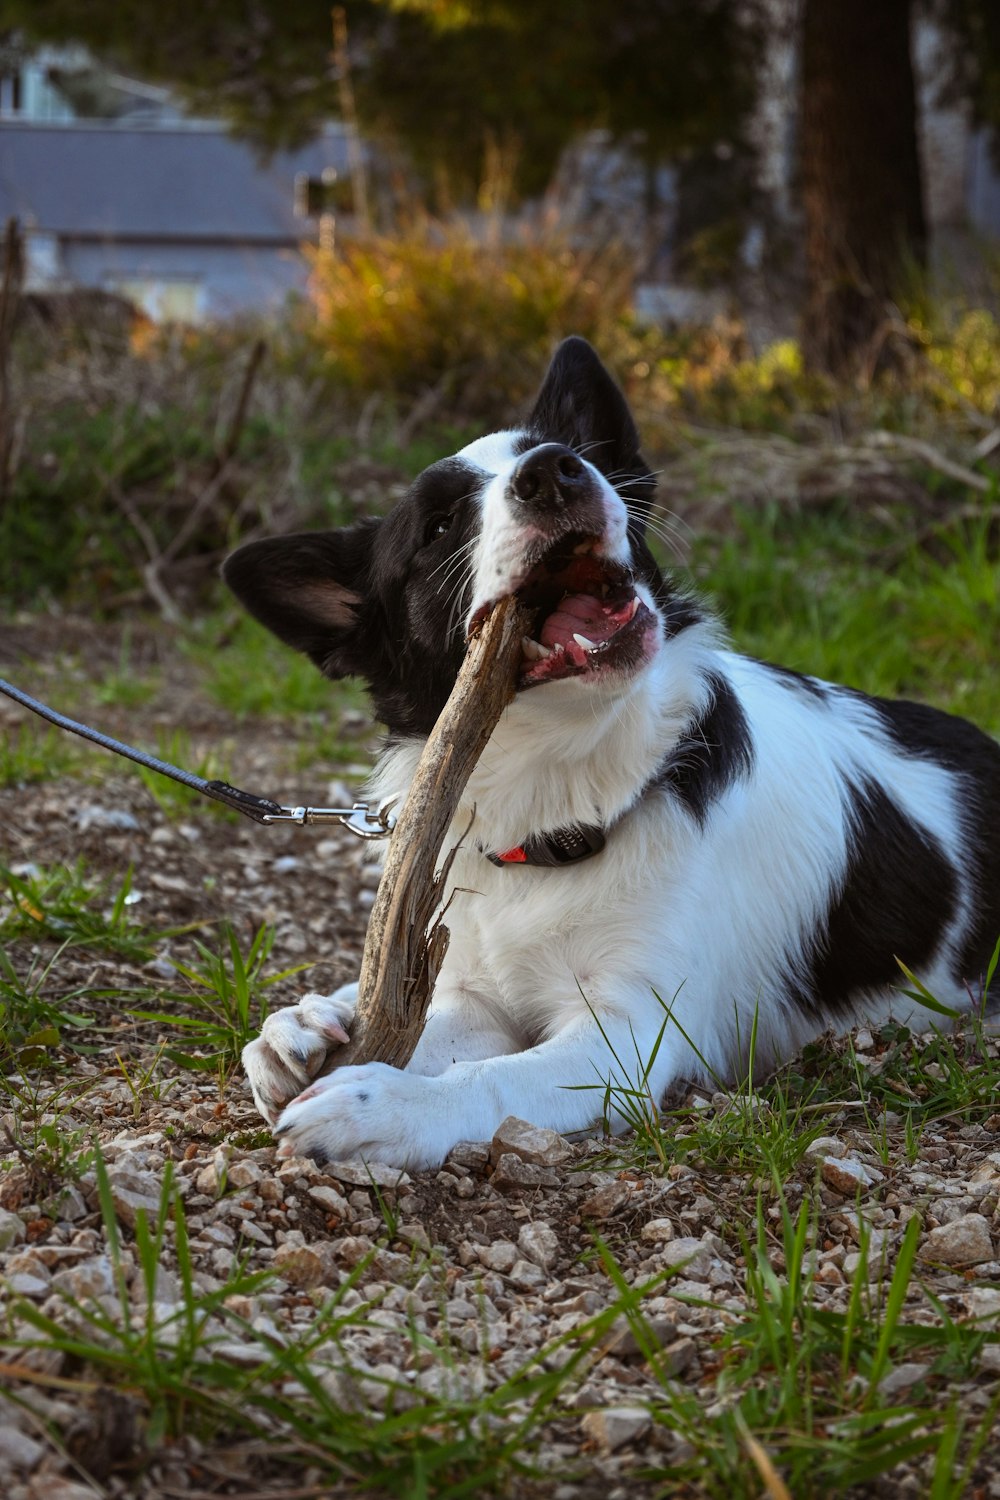 a black and white dog chewing on a stick